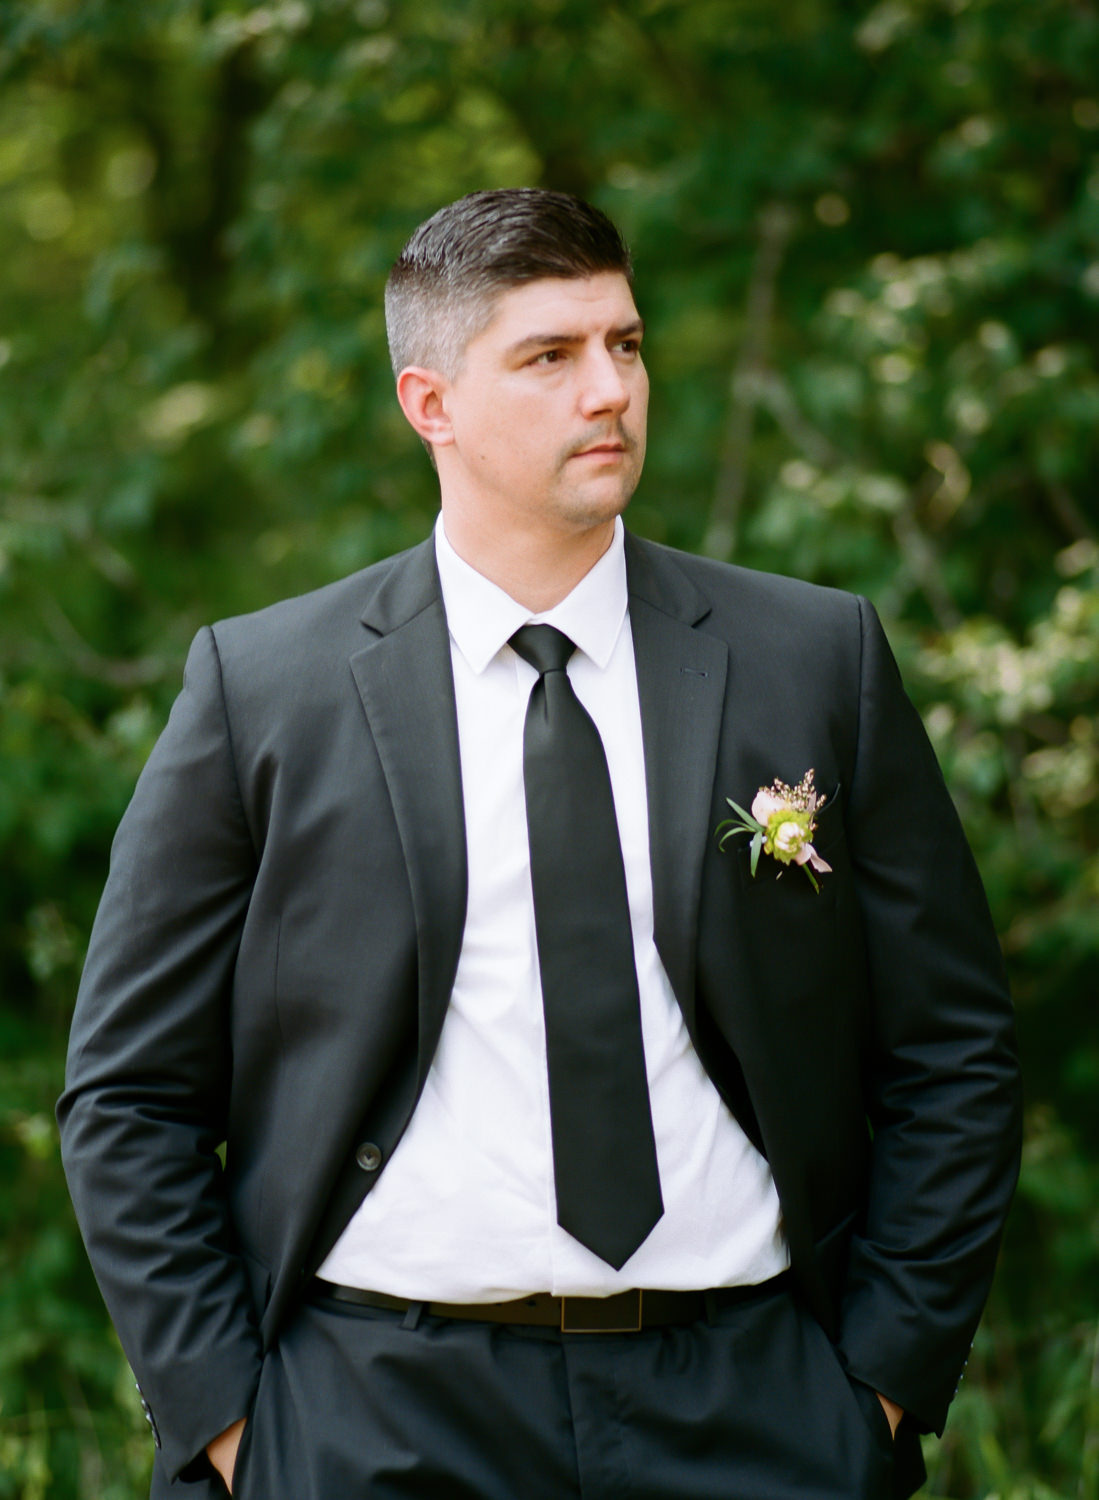 groom in suit with white boutonniere, St. Louis wedding photography